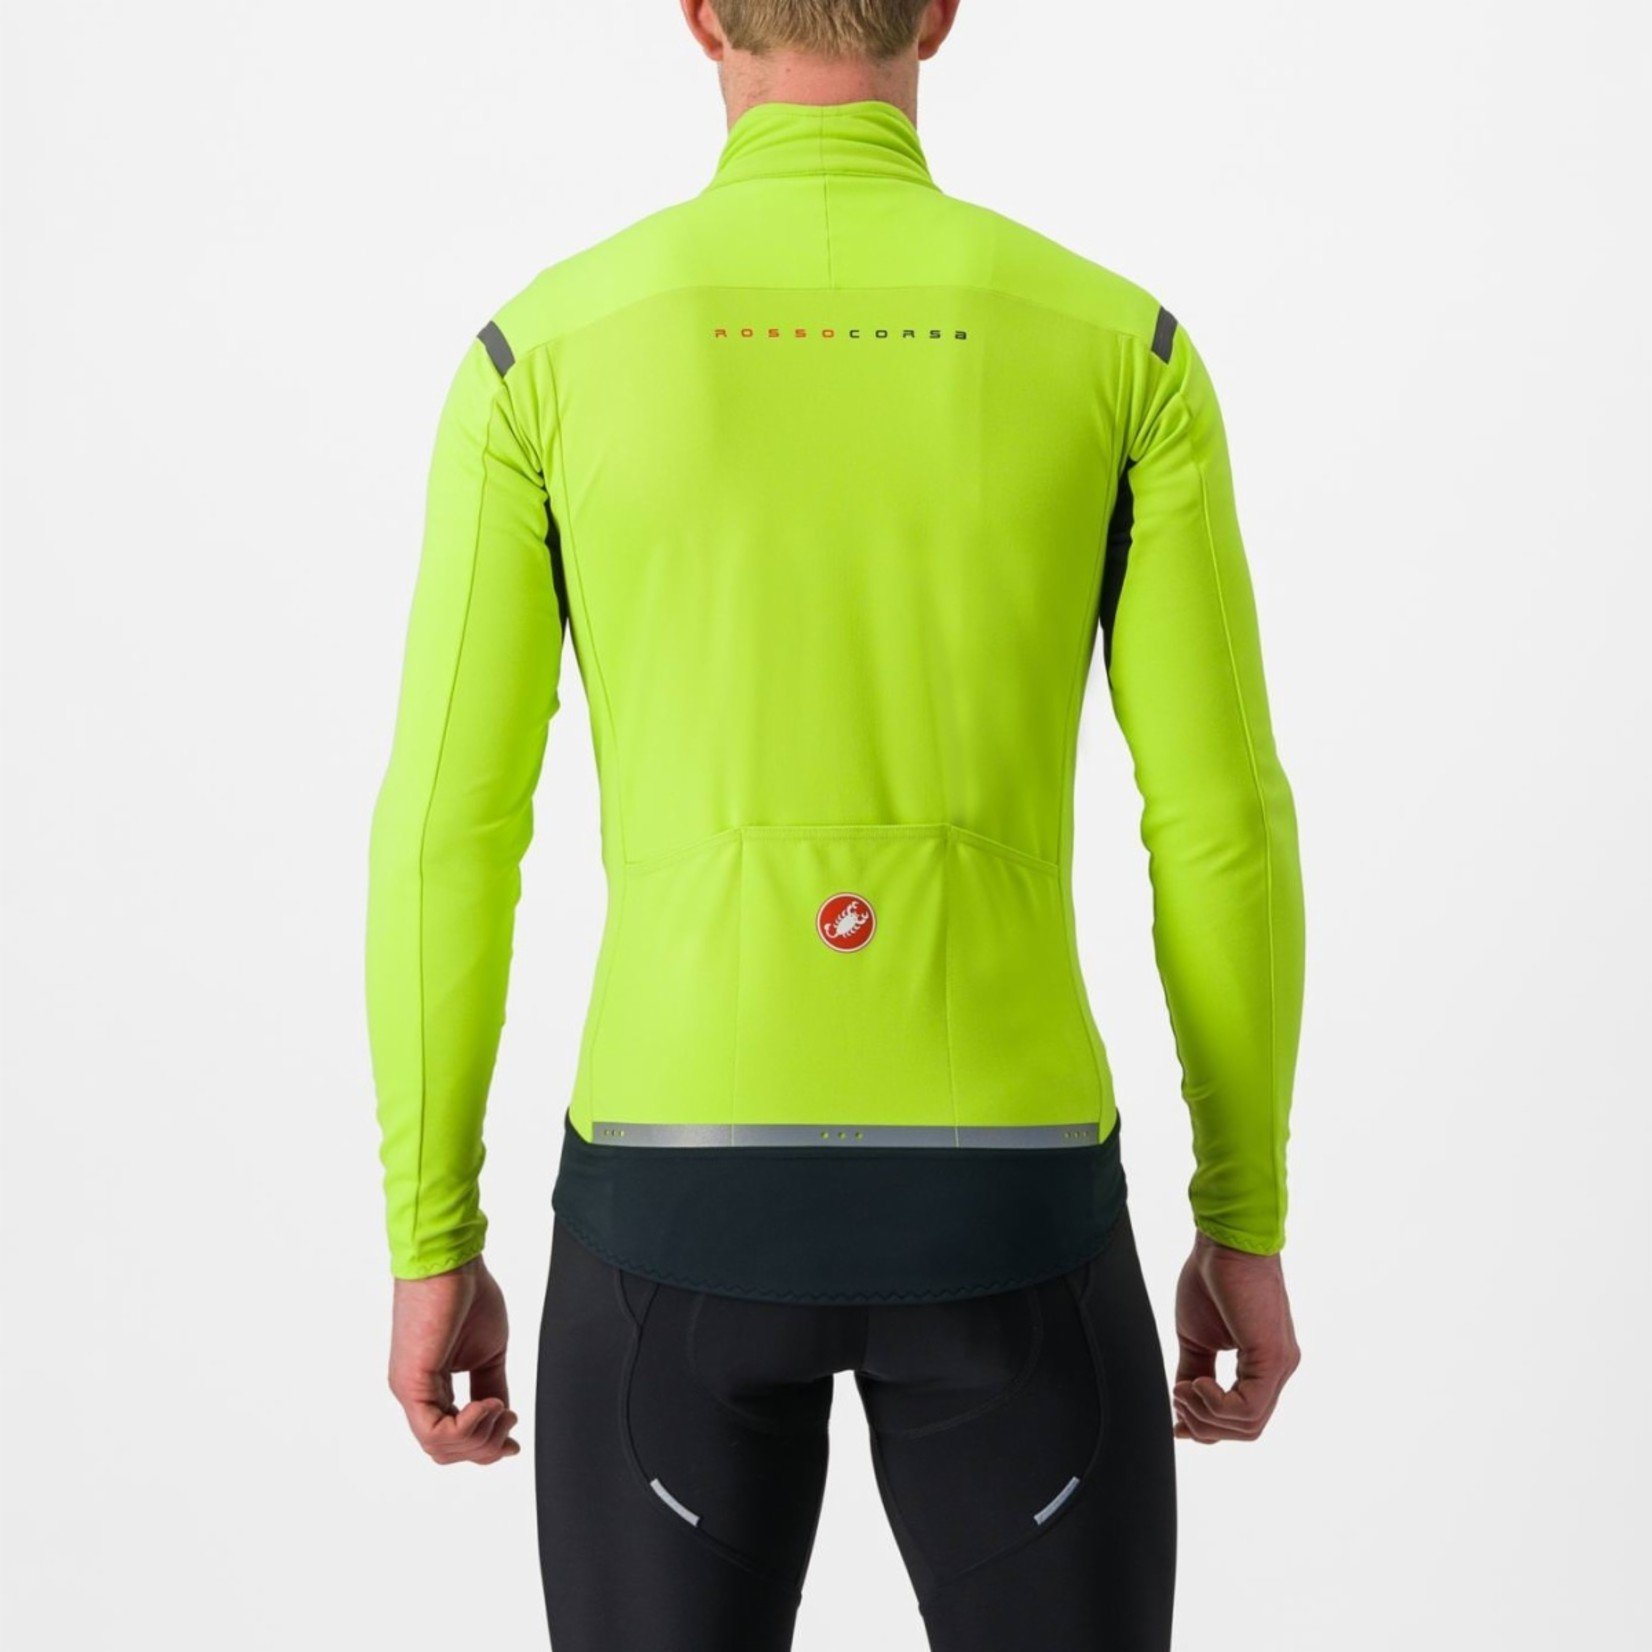 CASTELLI, Perfetto ROS 2 Jacket - The Cyclery